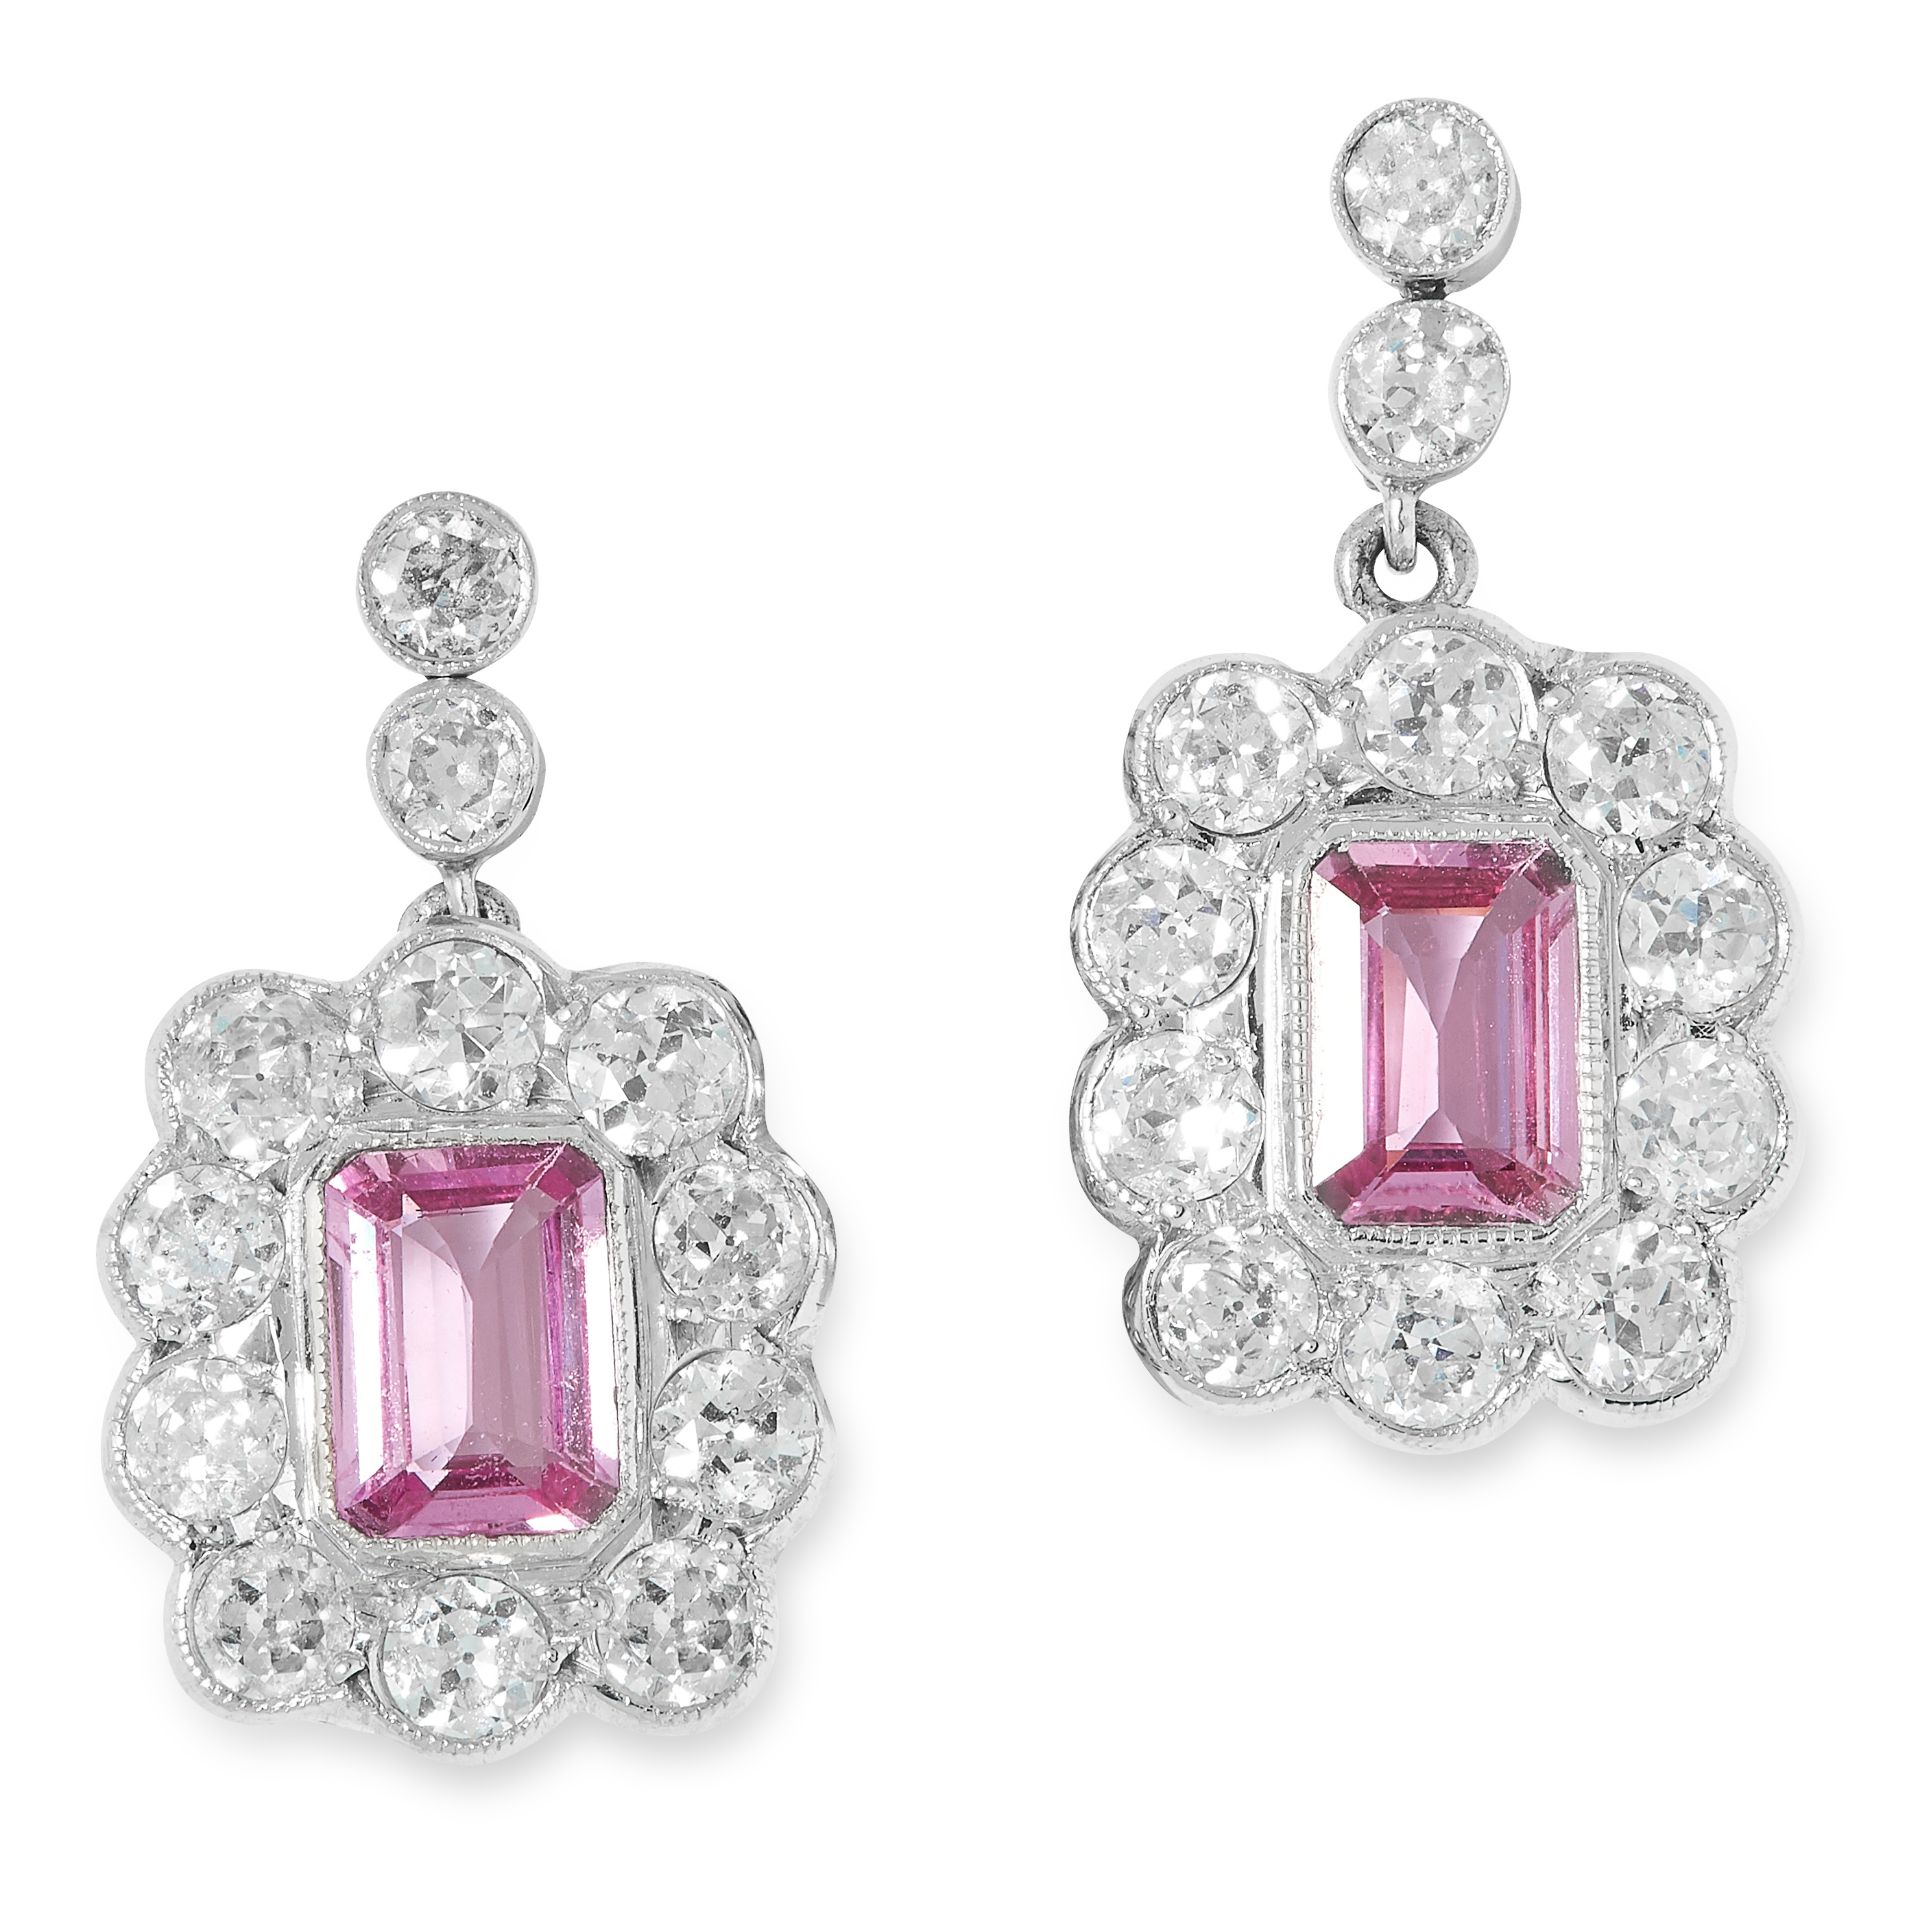 A PAIR OF PINK SAPPHIRE AND DIAMOND EARRINGS each set with an emerald cut pink sapphire totalling